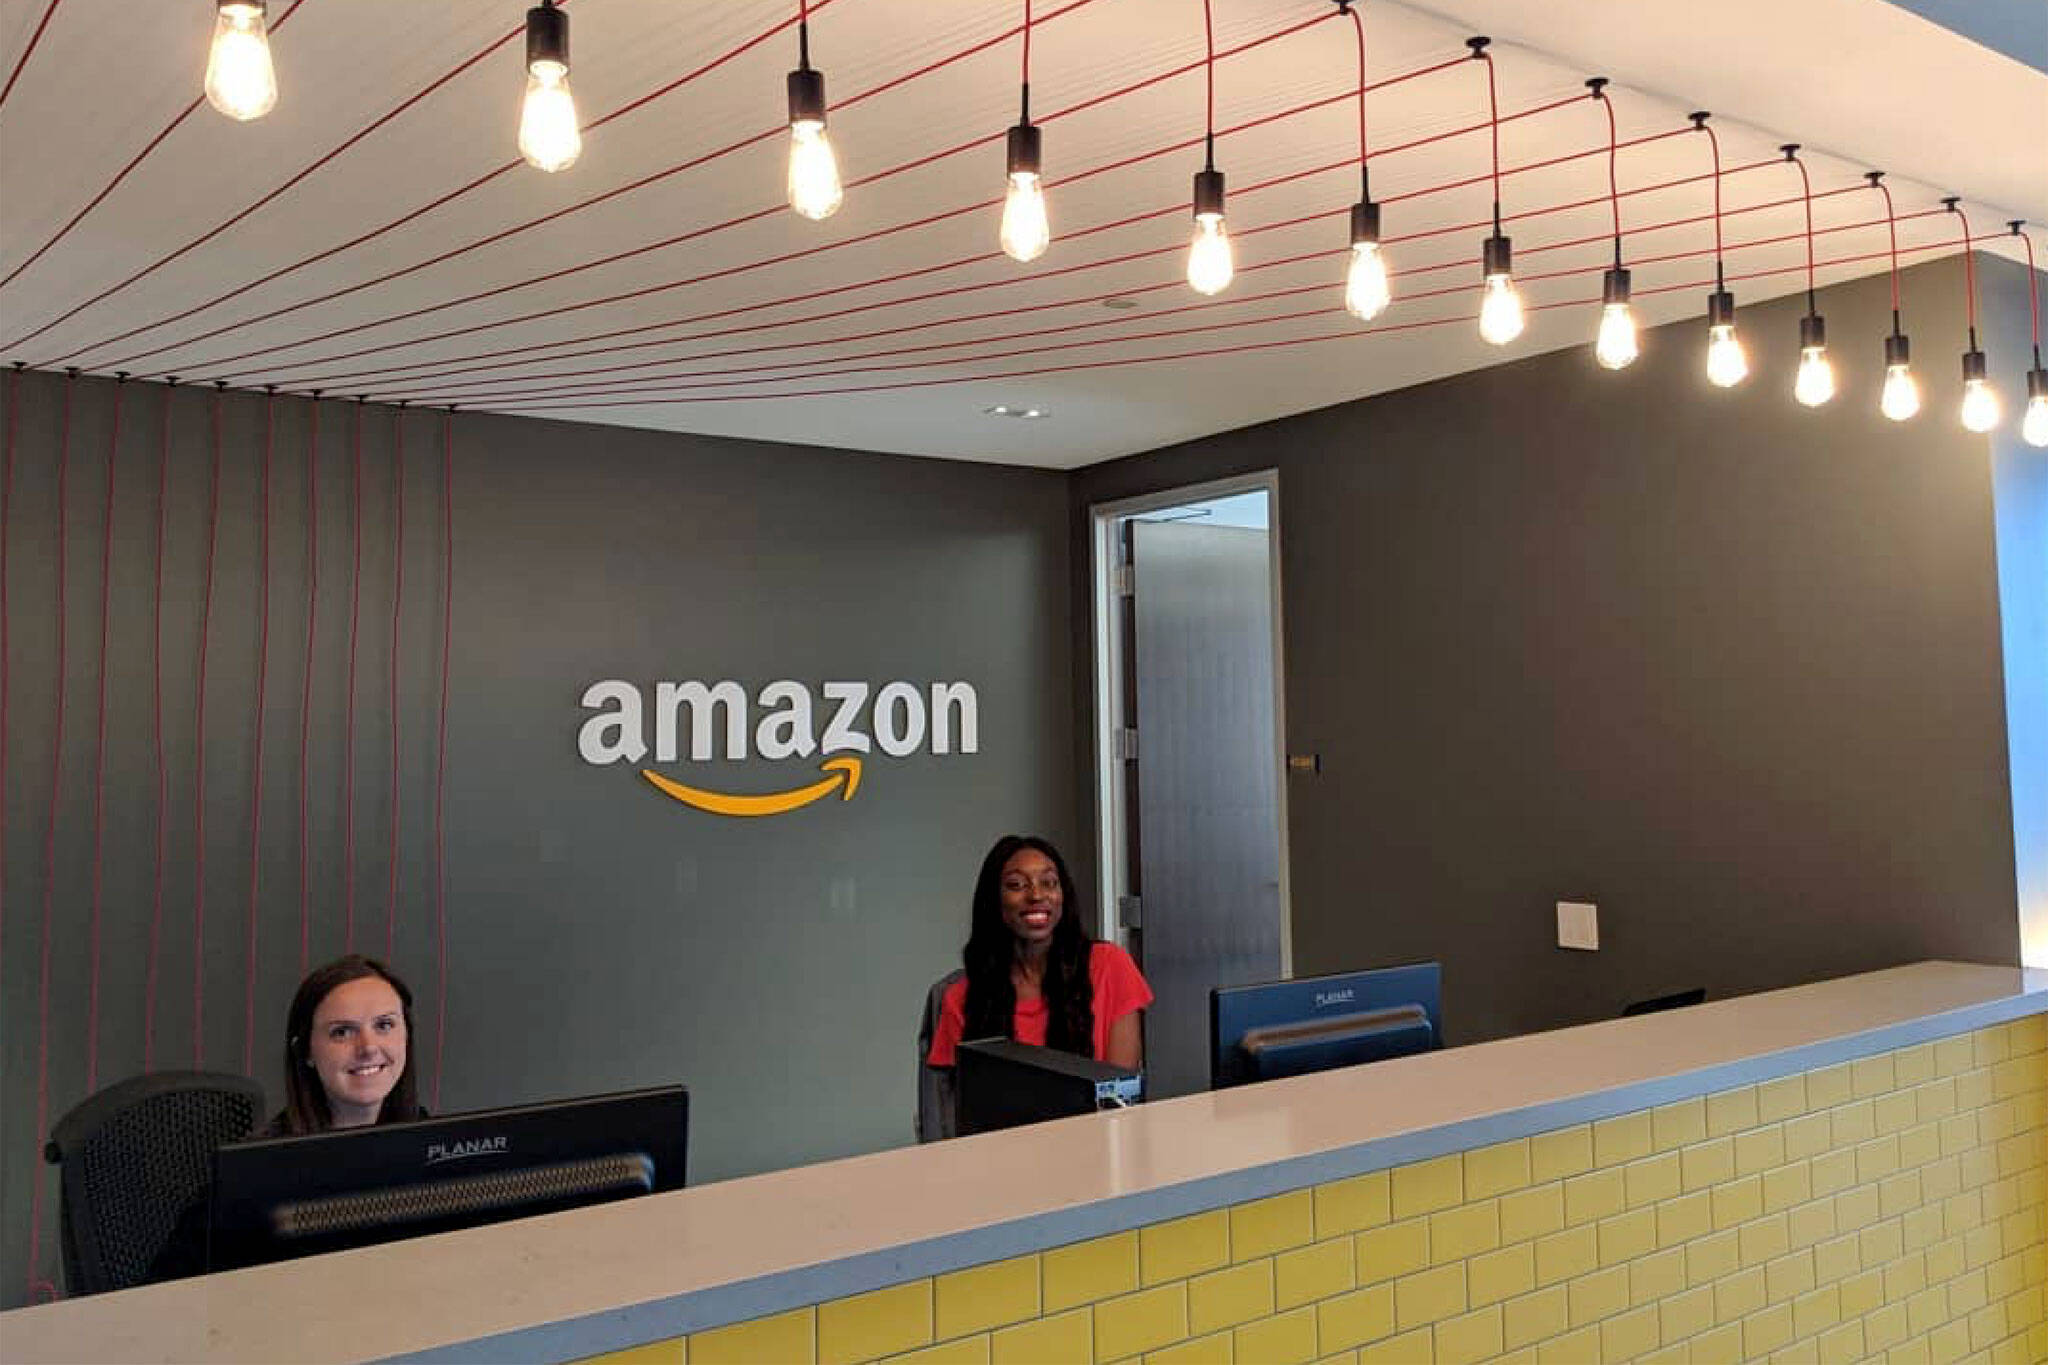 Amazon just opened a new office in downtown Toronto